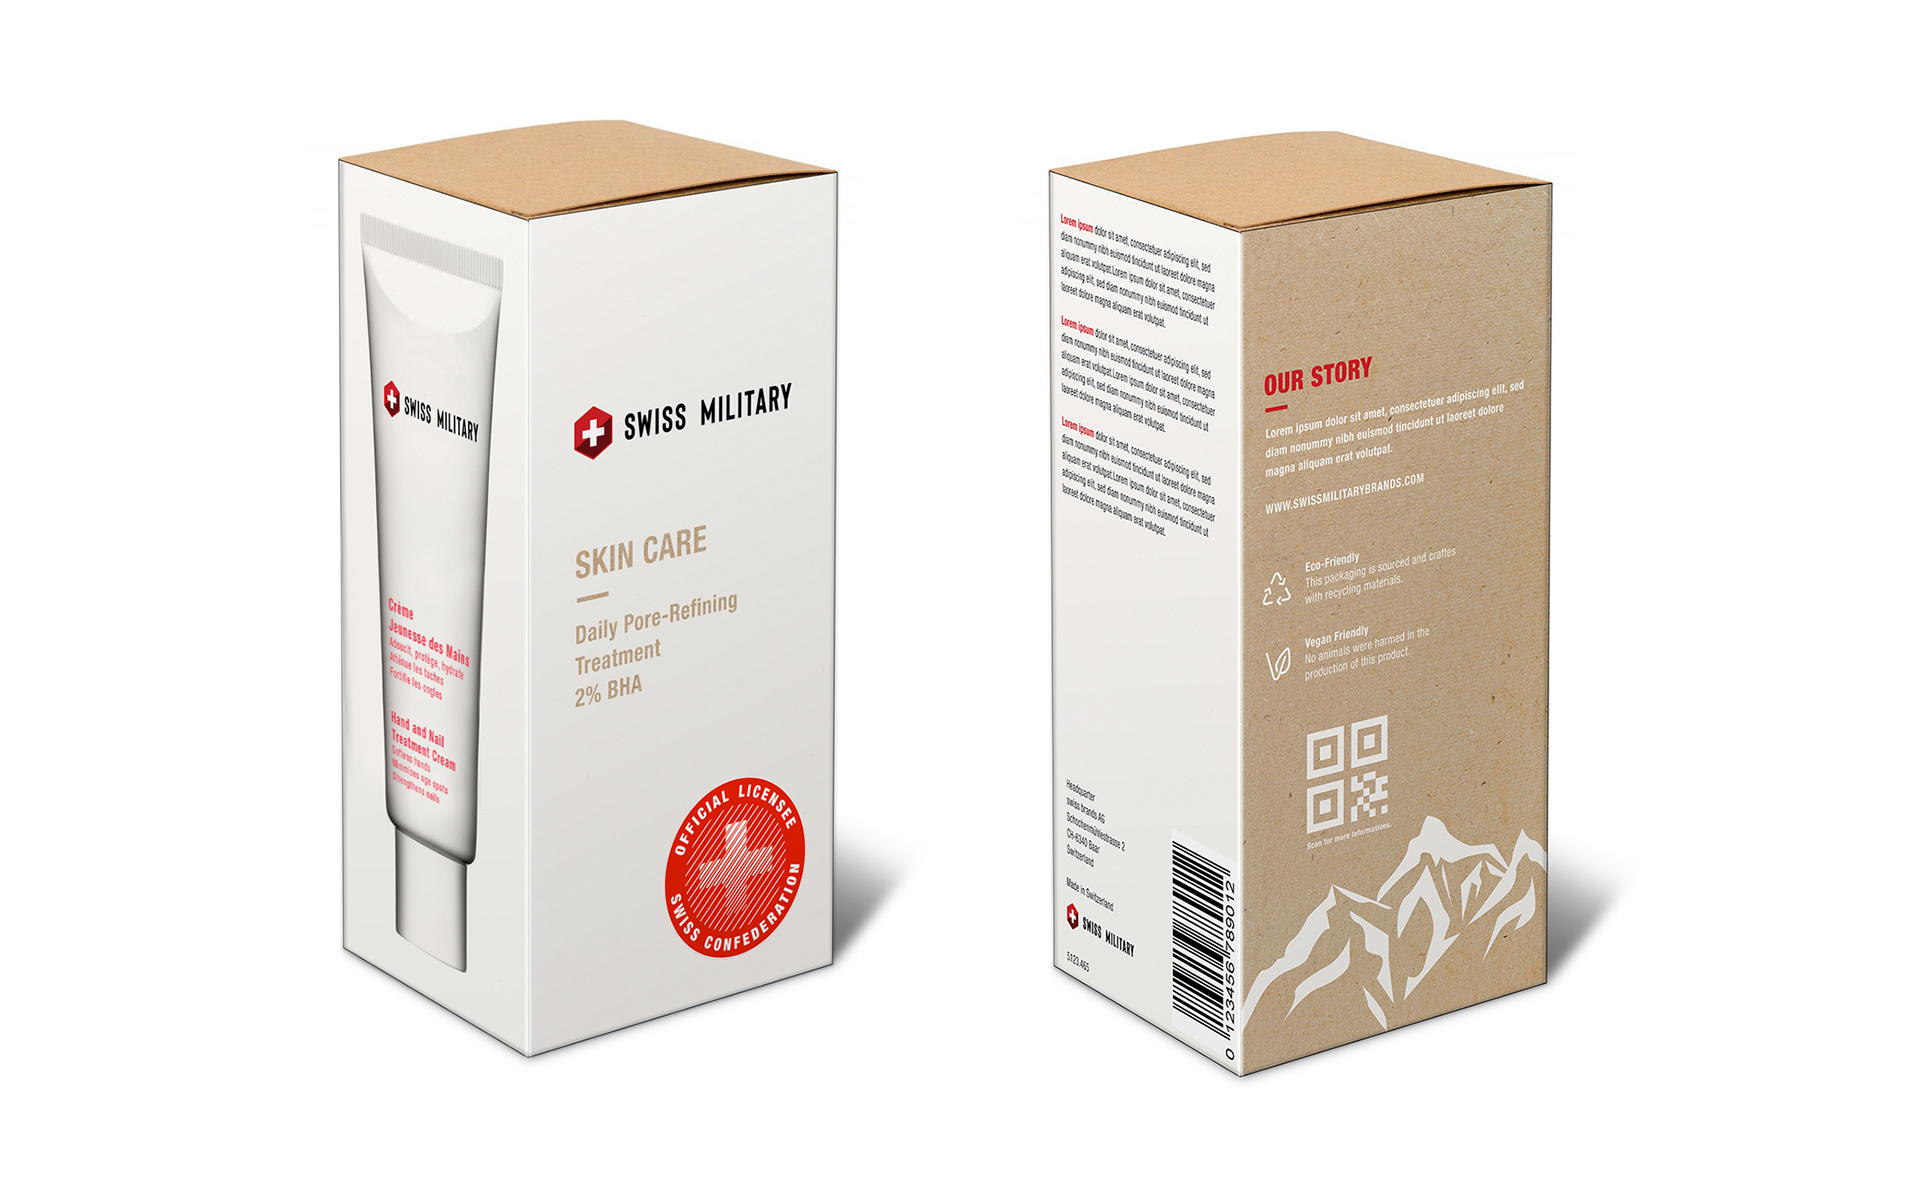 «Swiss Military» cosmetics packaging from swiss brands ag